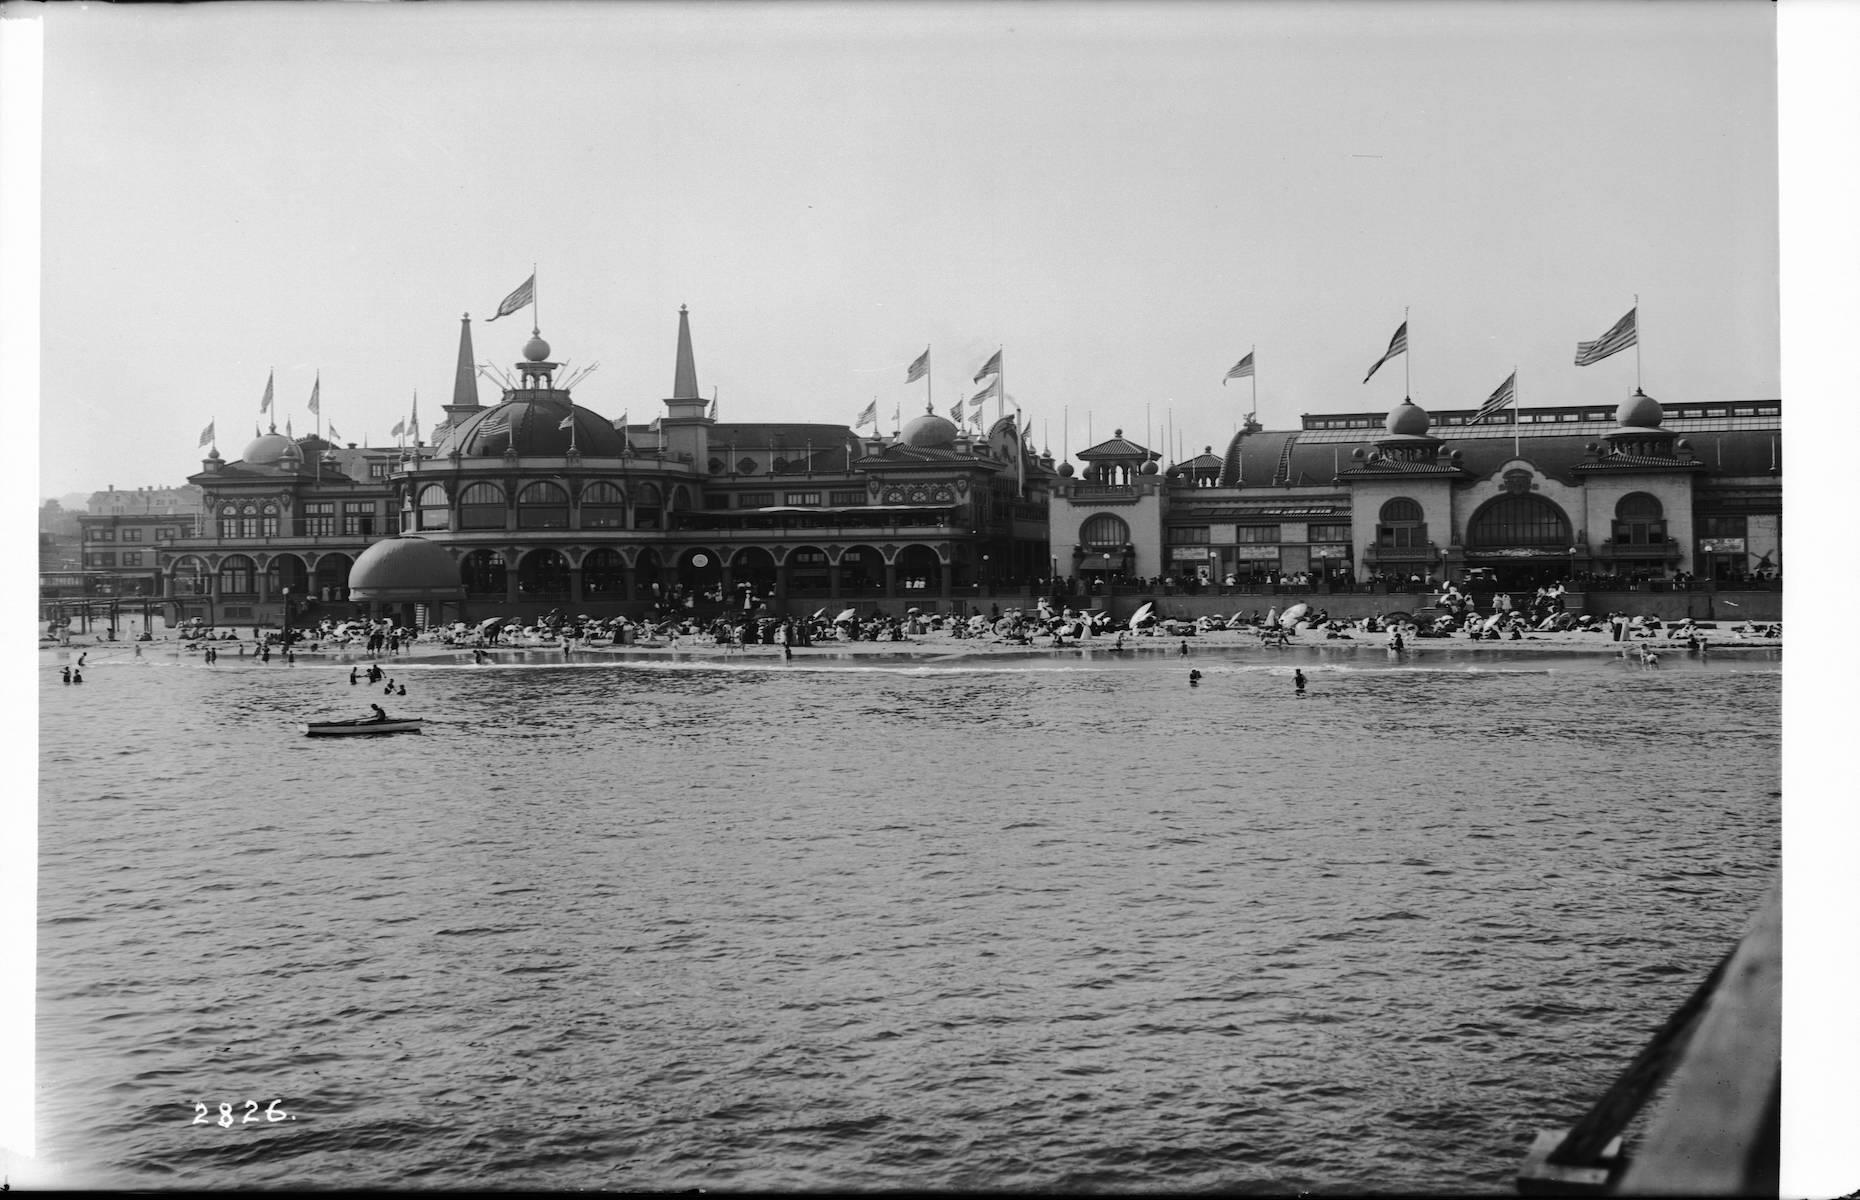 California’s beloved Santa Cruz Beach Boardwalk is the oldest theme park in the state. It was built by local businessman Fred Swanton in 1907 and offered quintessential seaside fun with turn-of-the-century rides, an indoor saltwater bath house, casino and ballroom. Today the boardwalk is a registered historic landmark, as are two of its still-functioning rides – the 1911 Looff carousel and the Giant Dipper roller coaster which opened in 1924.